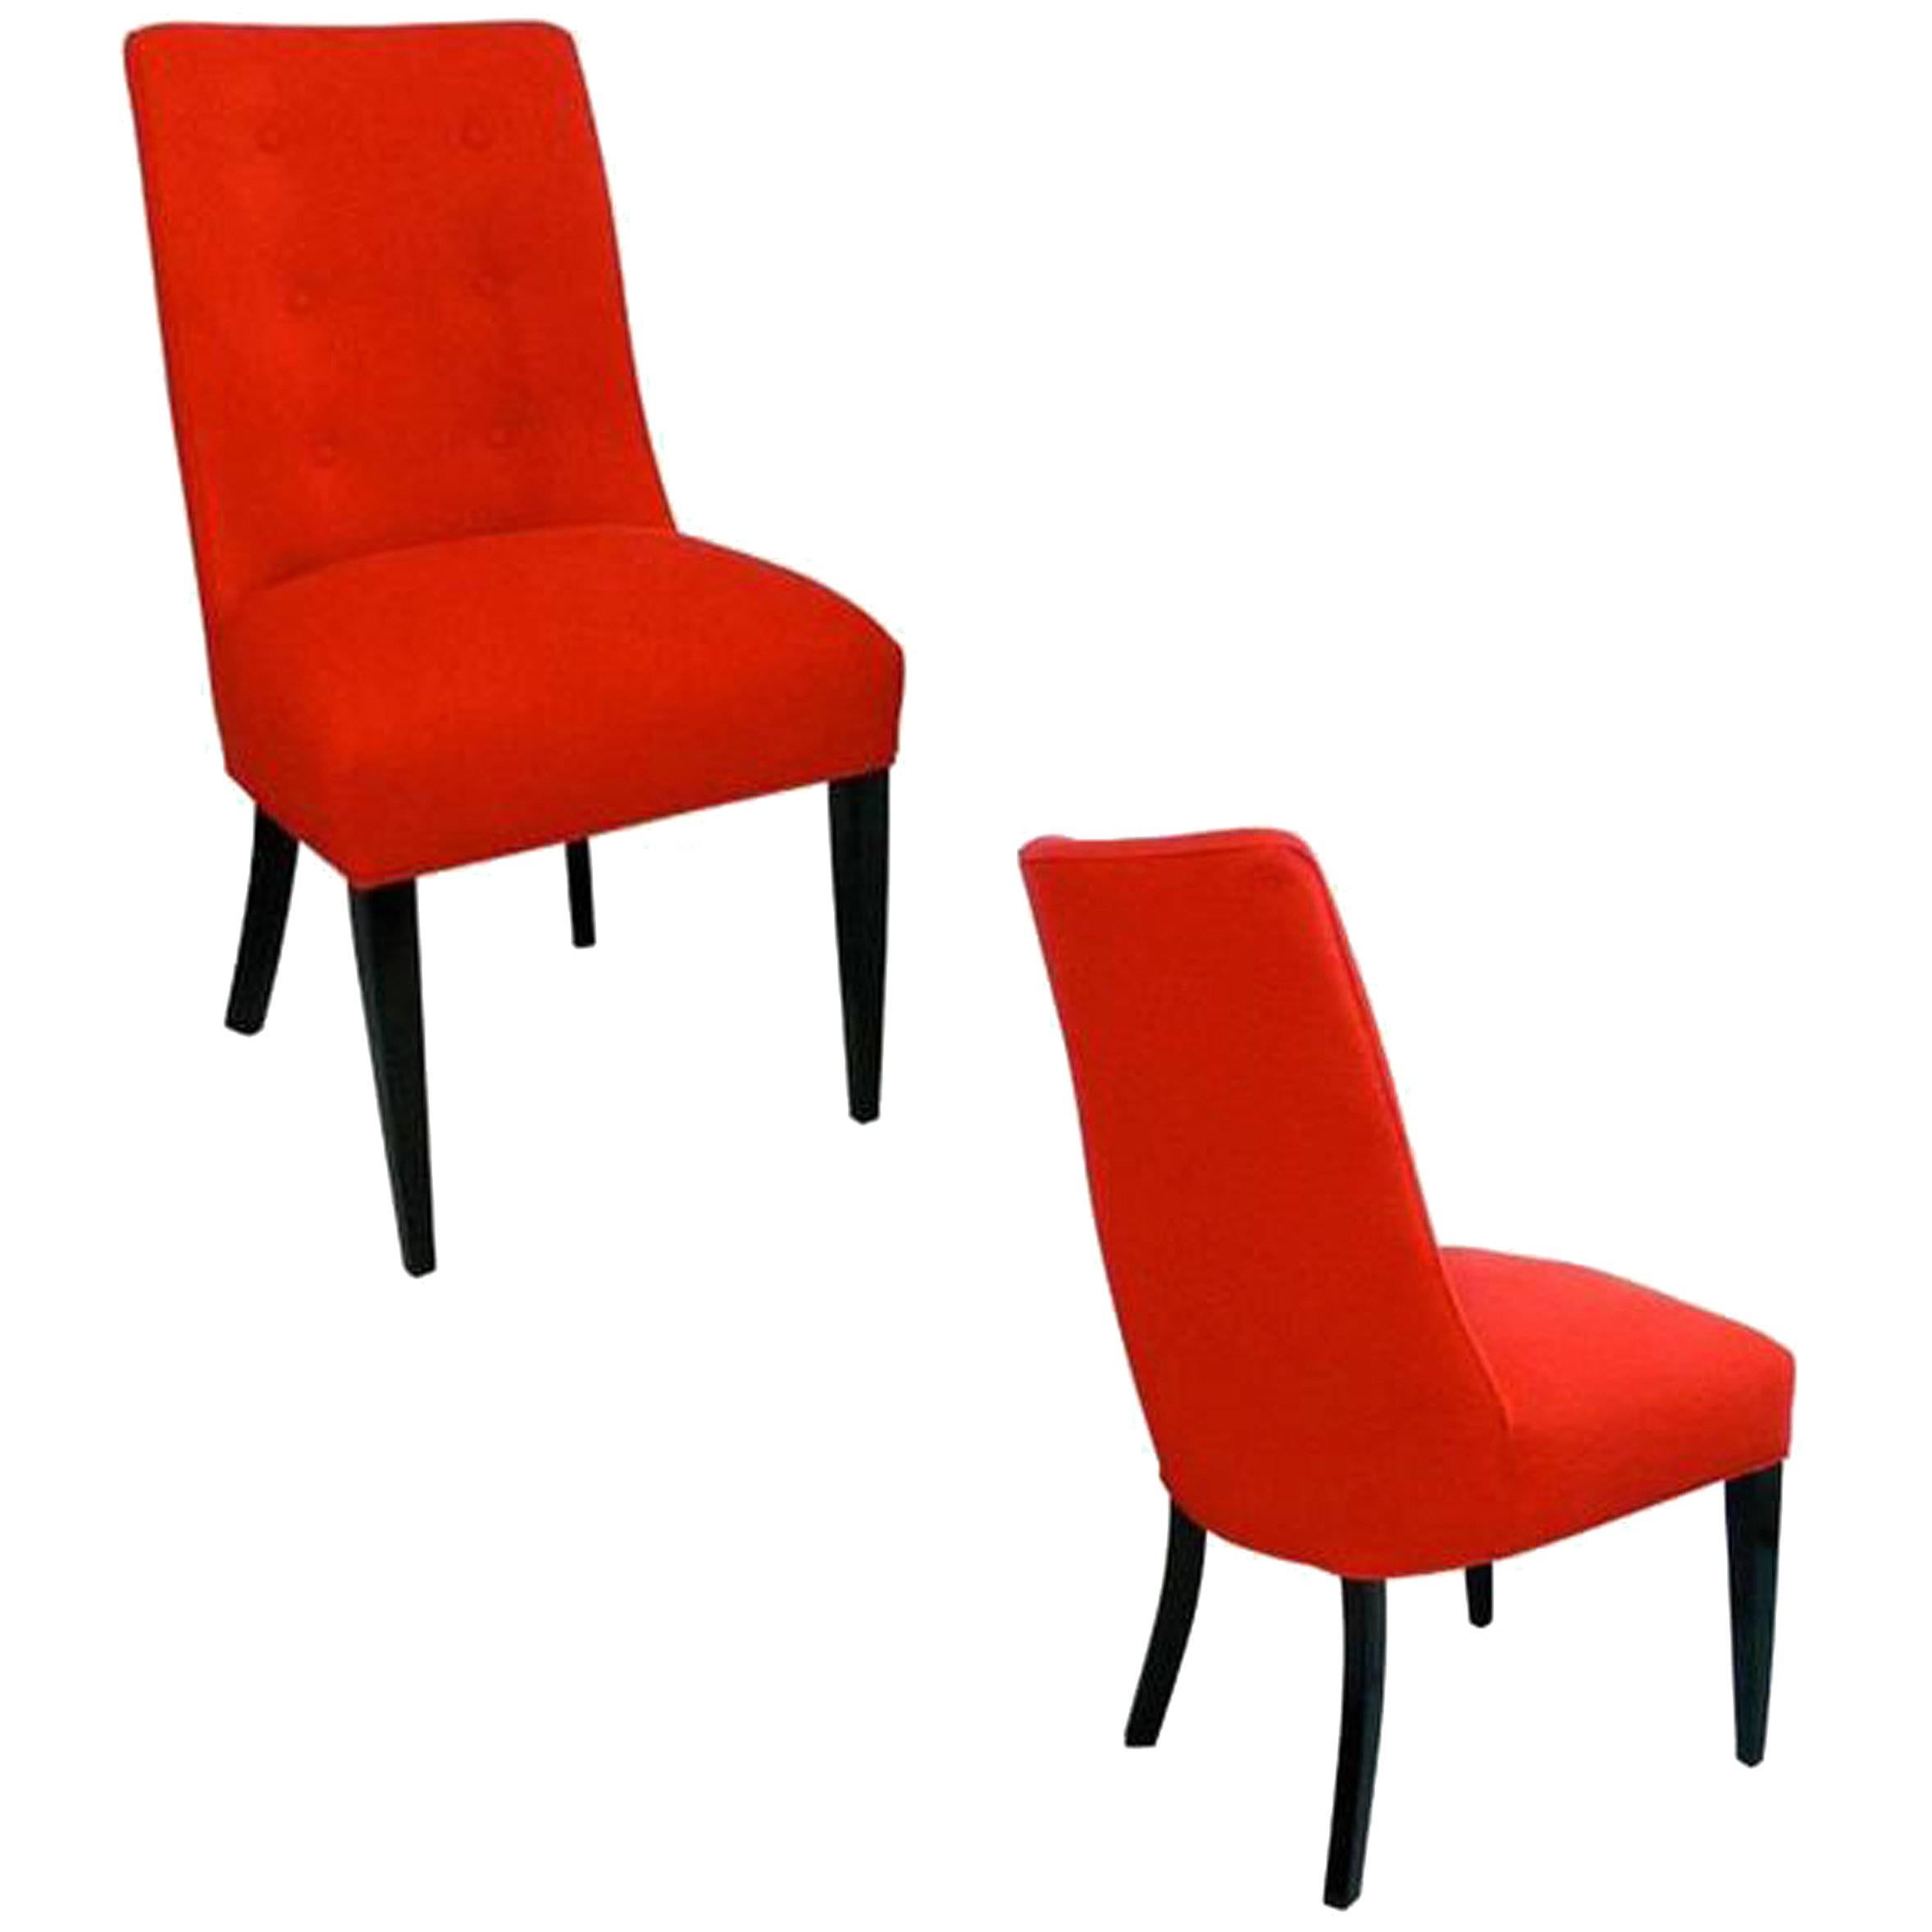 Pair of Midcentury Poppy Red Button Back Chairs